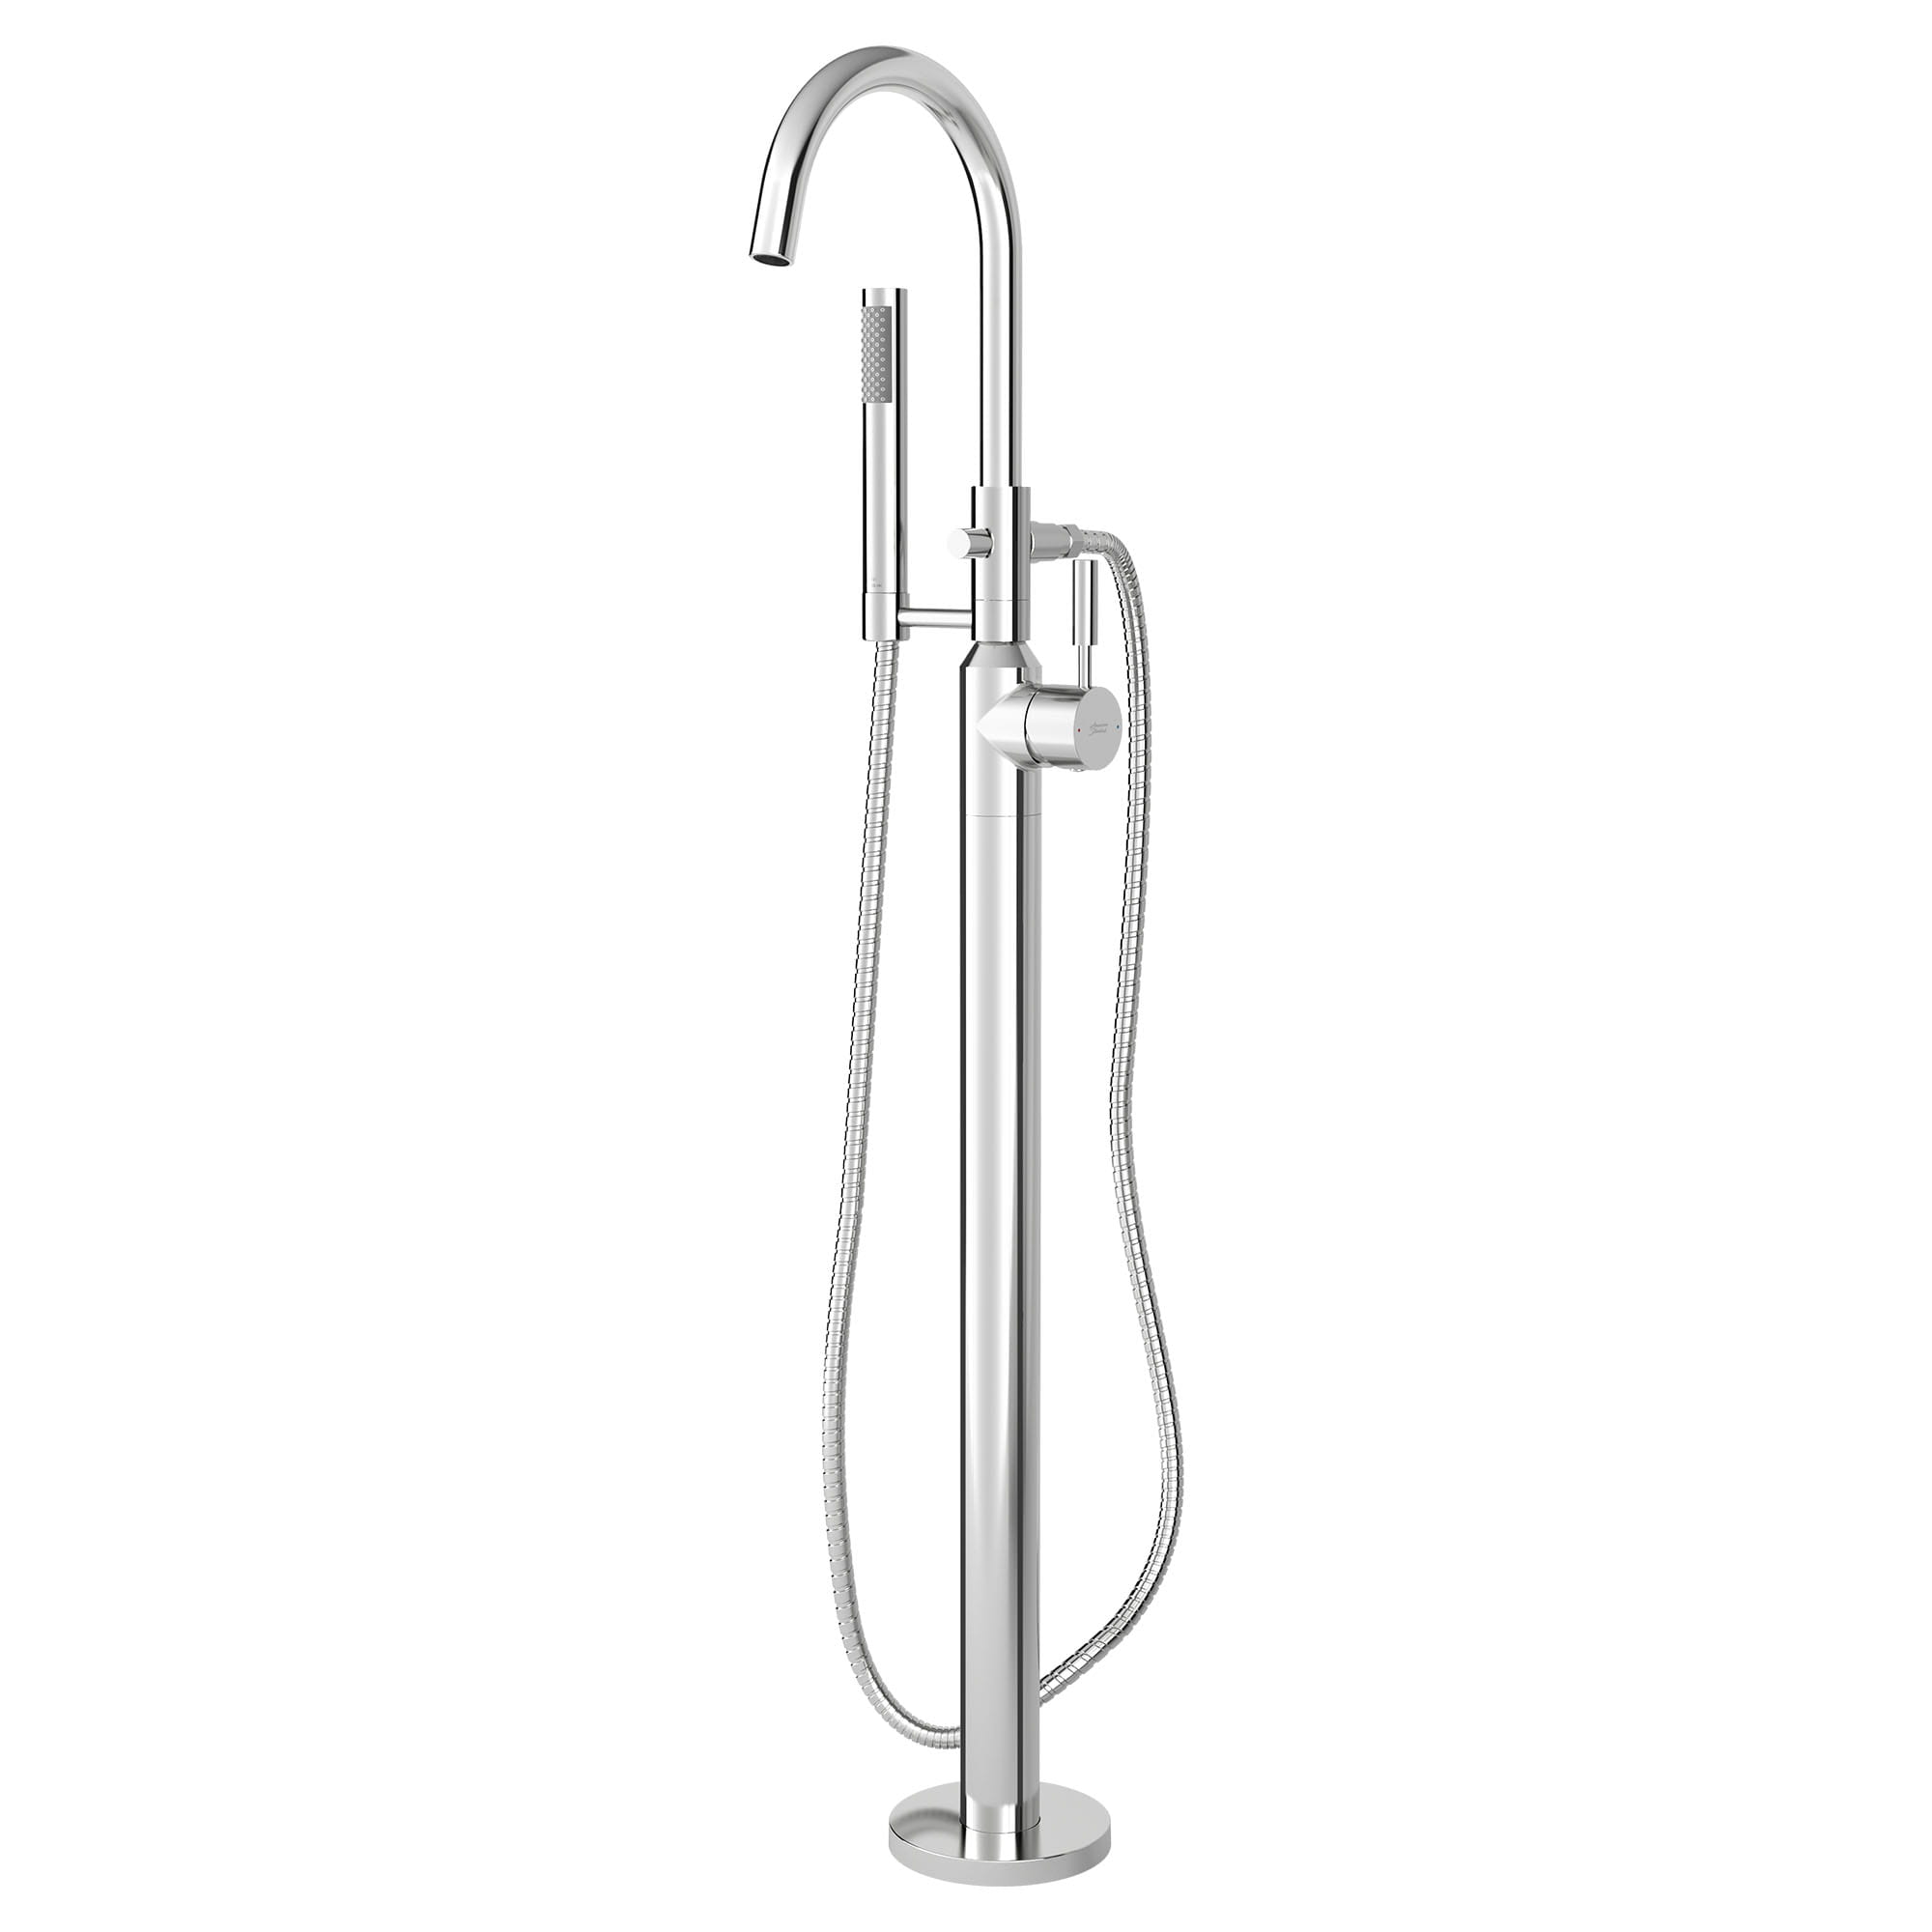 Cadet Freestanding Bathtub Faucet With Lever Handle for Flash Rough In Valve CHROME